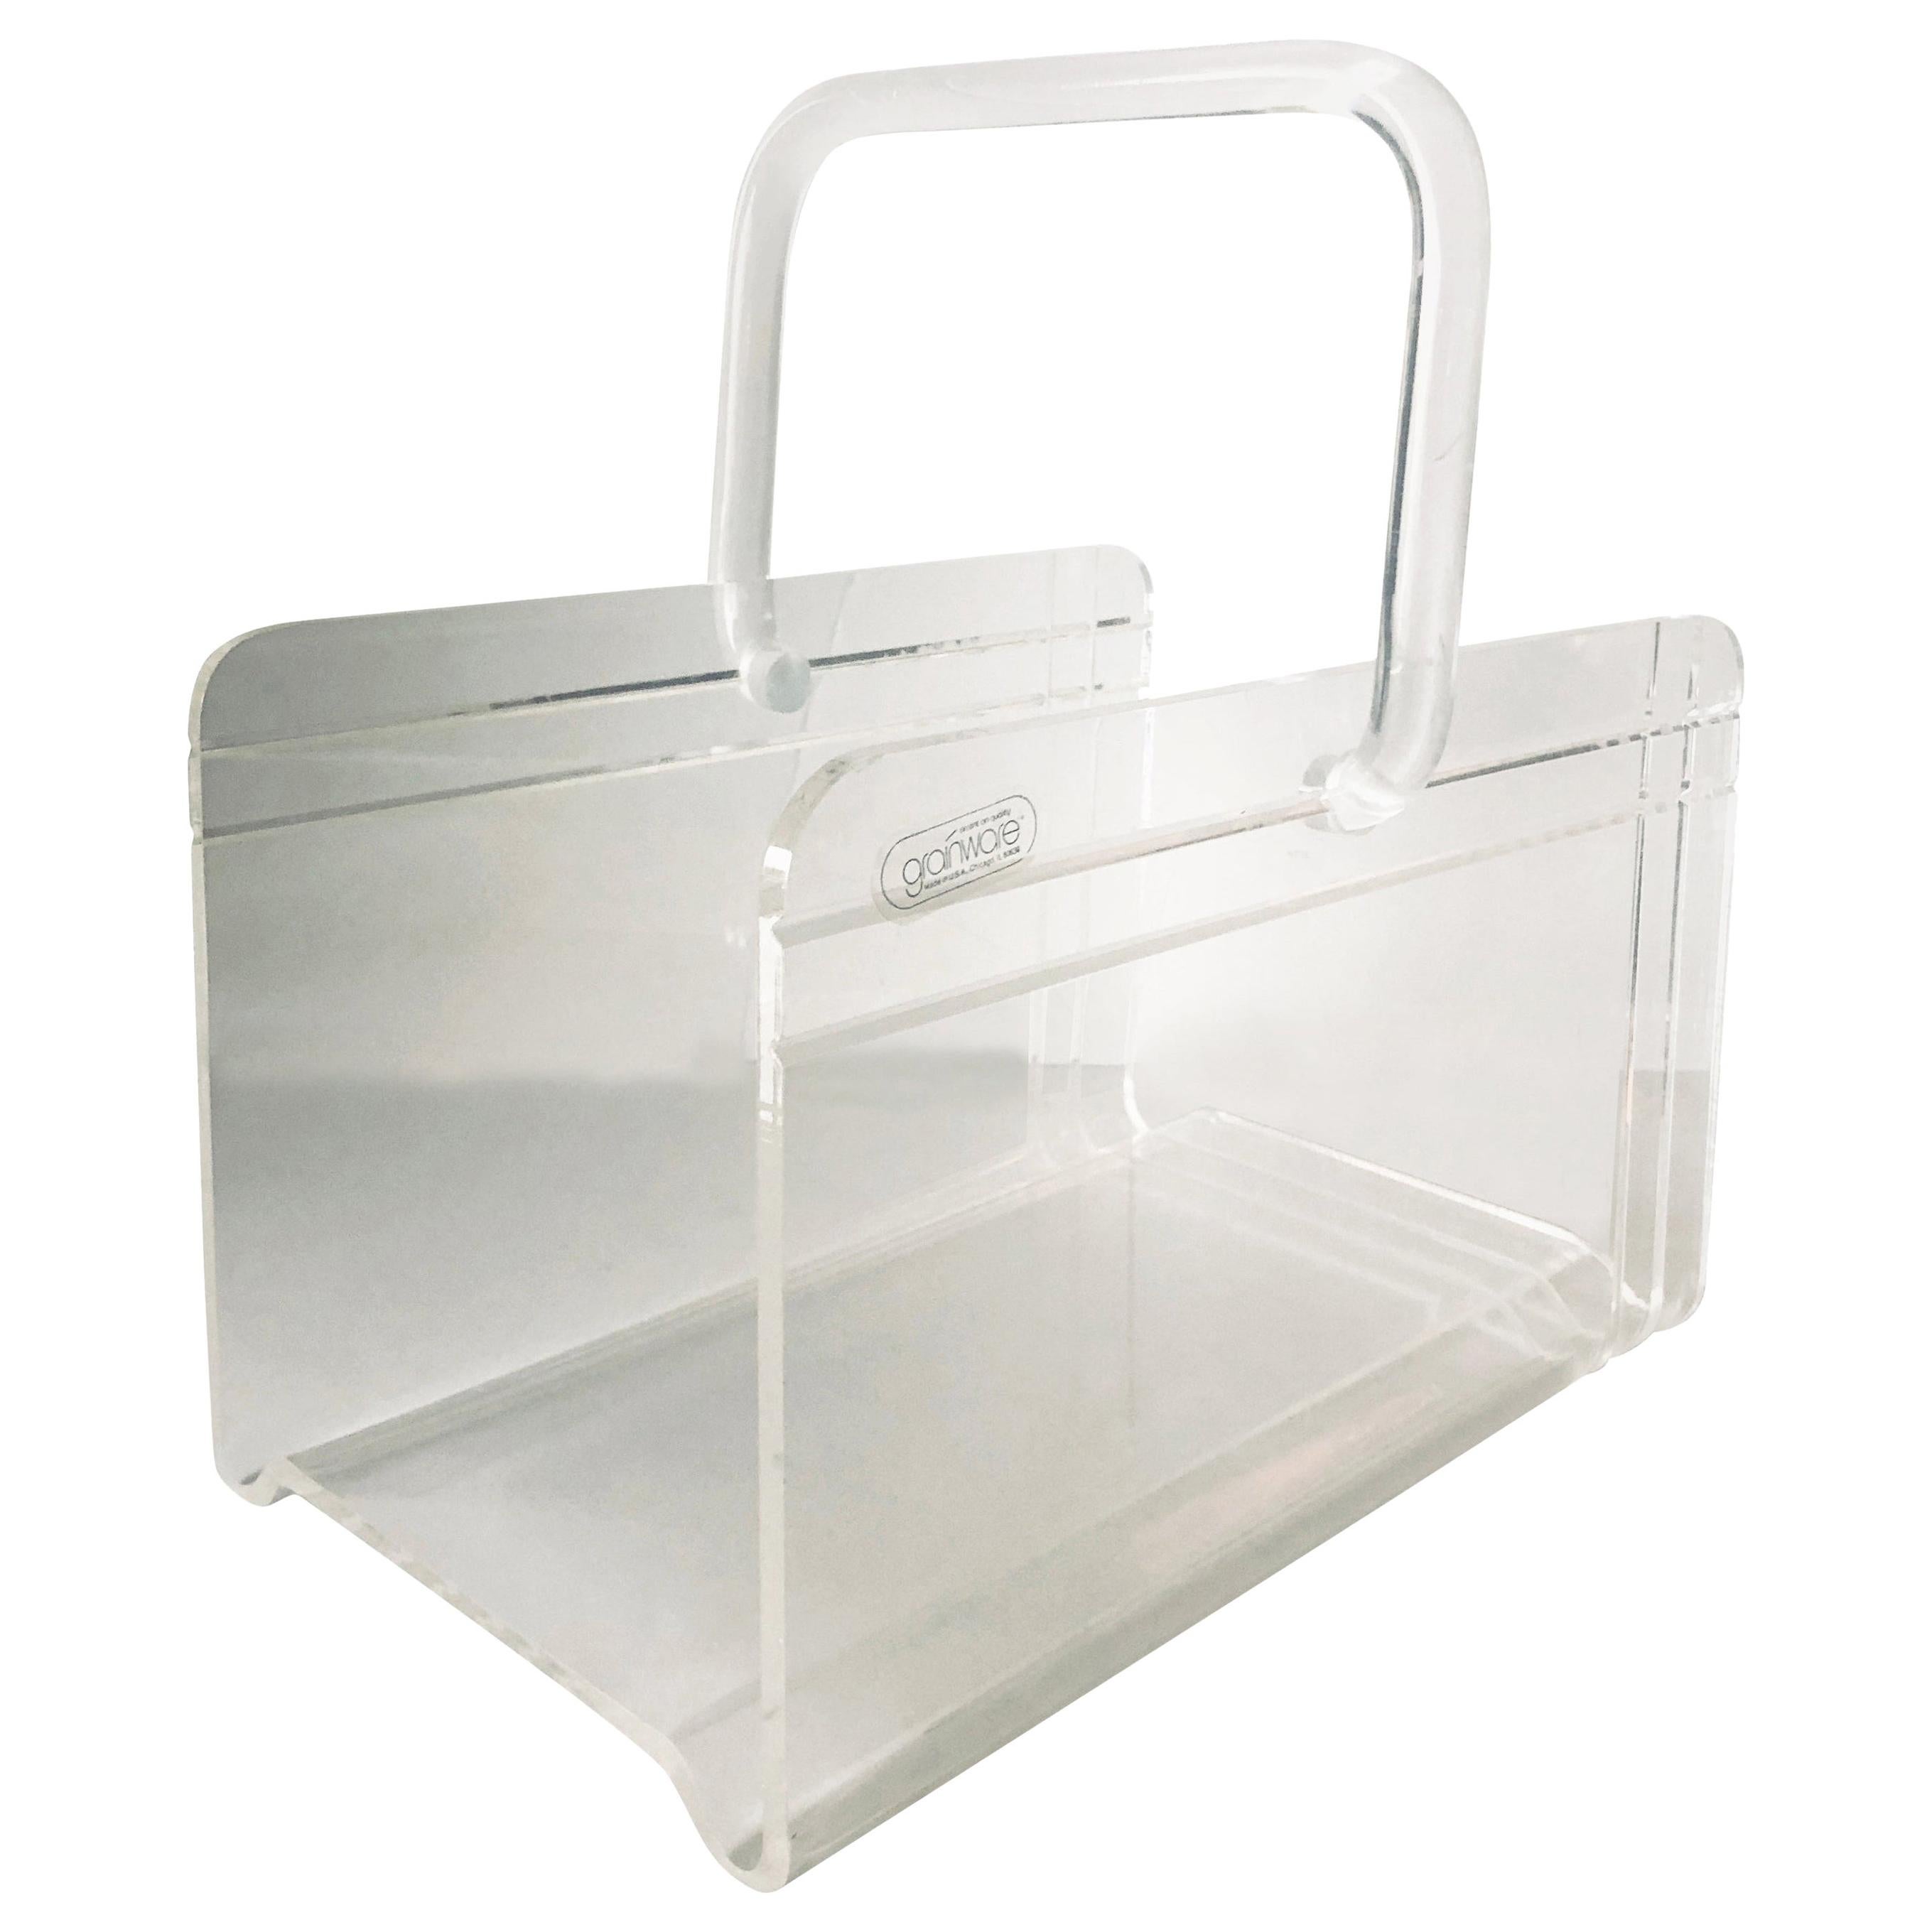 Grainware Clear Lucite or Acrylic Magazine Rack / Caddy / Holder with Handle For Sale